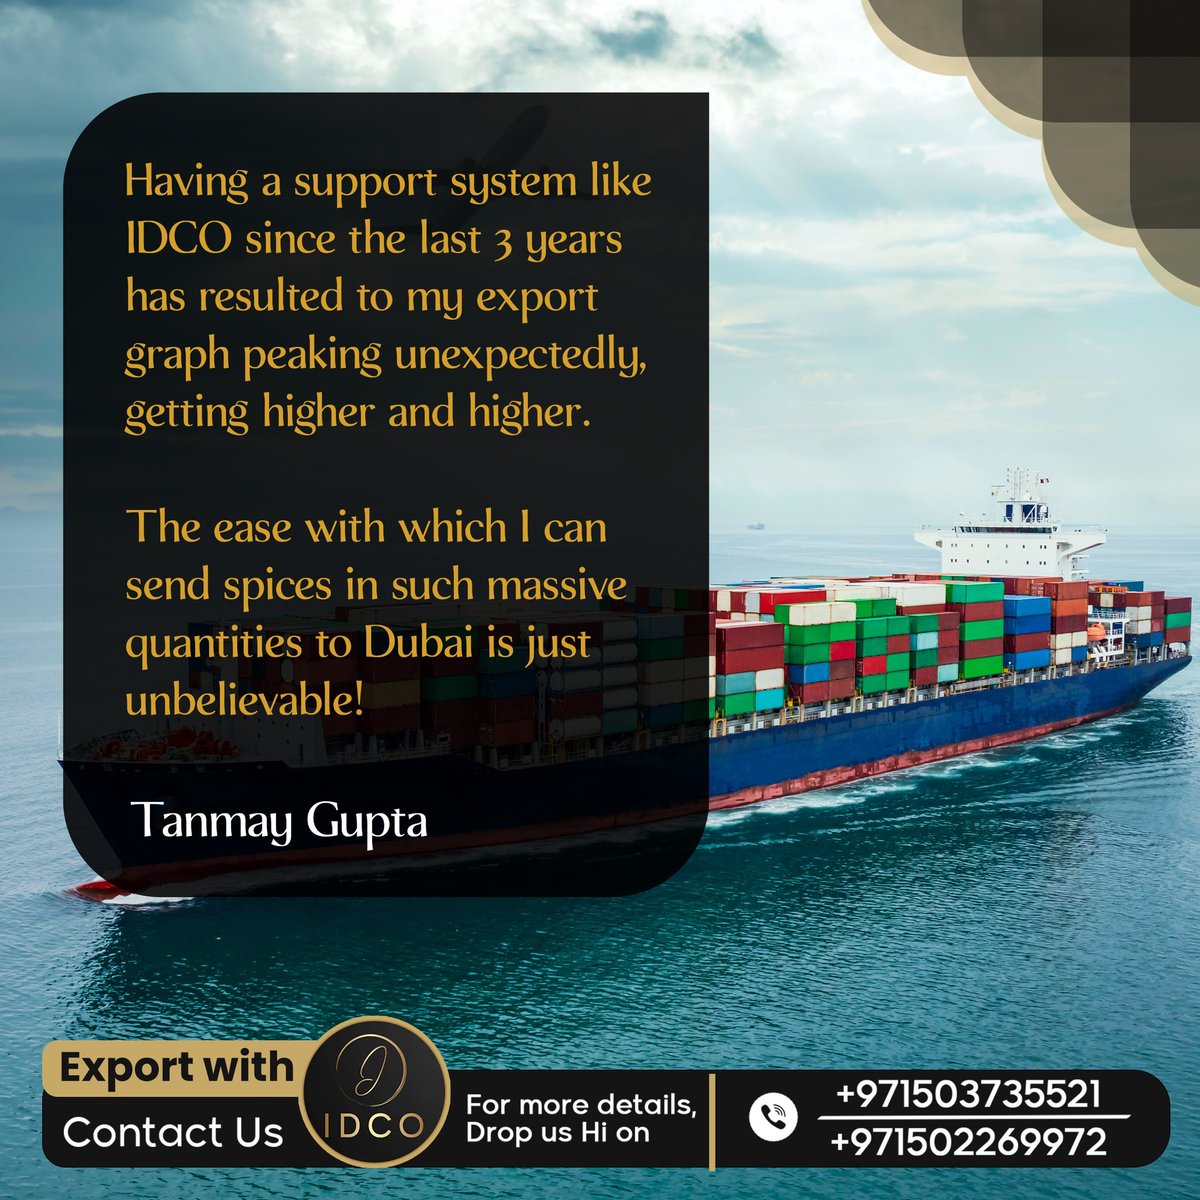 Truly blessed to have people's love and trust from all over the world! 

#happycustomers #reviewsmatter #idcorocks #idcofoodstufftrading #idcofoodtrading #export #import #exportquality #dubai #india #Spiceexporter